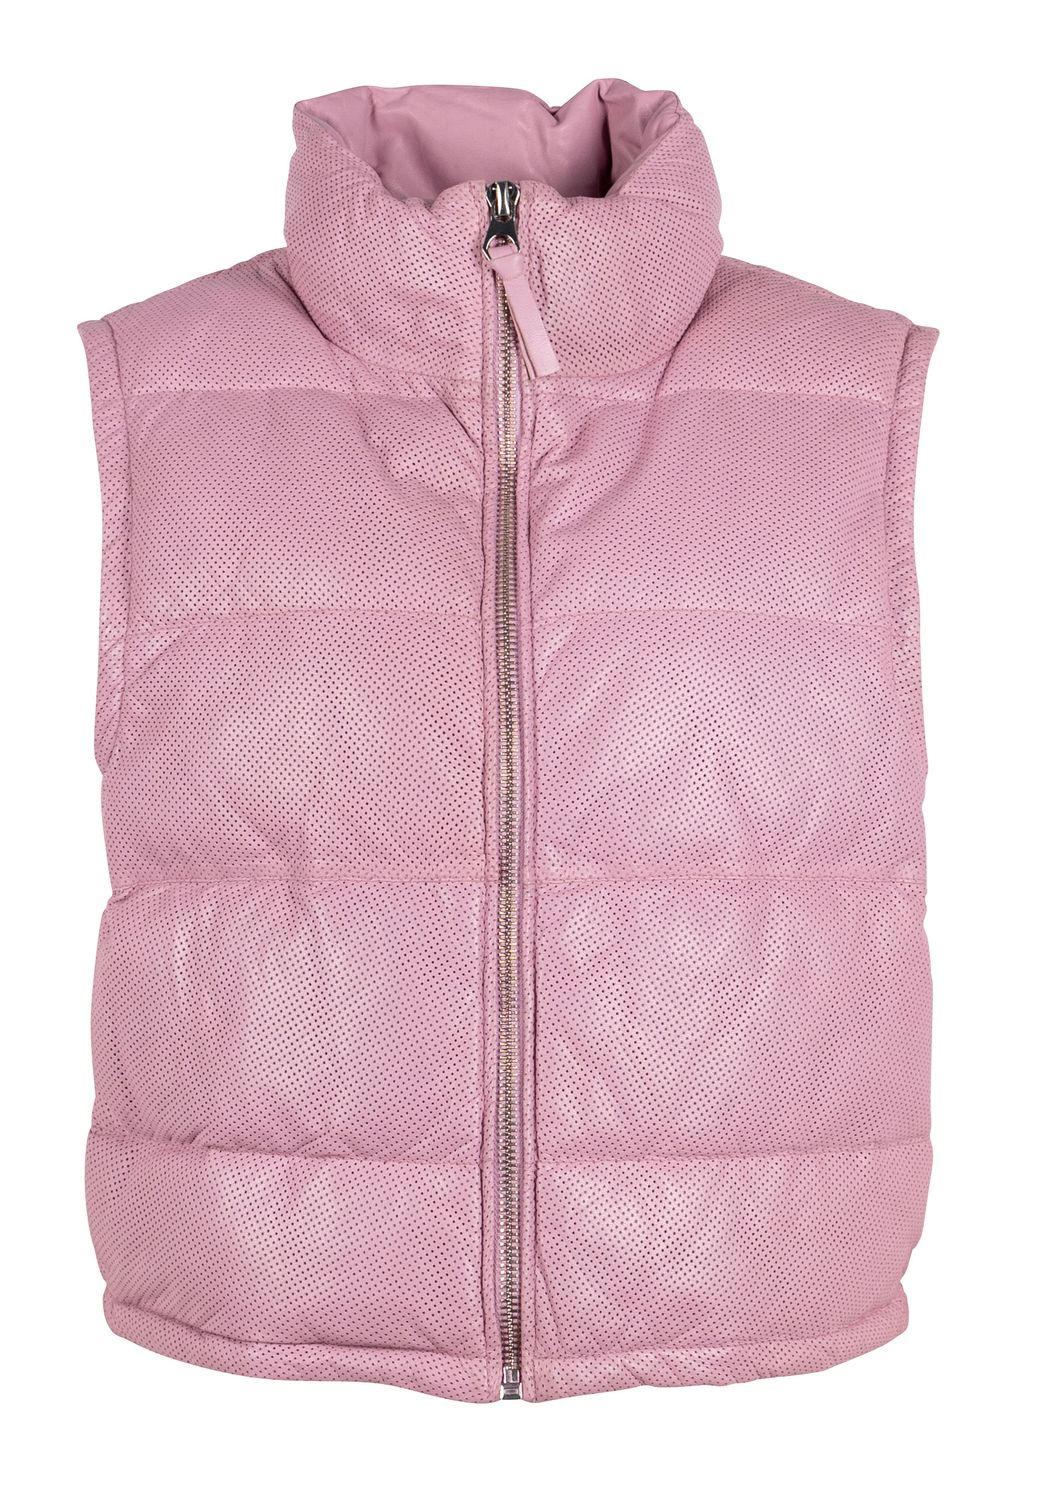 GWEllice OS light pink